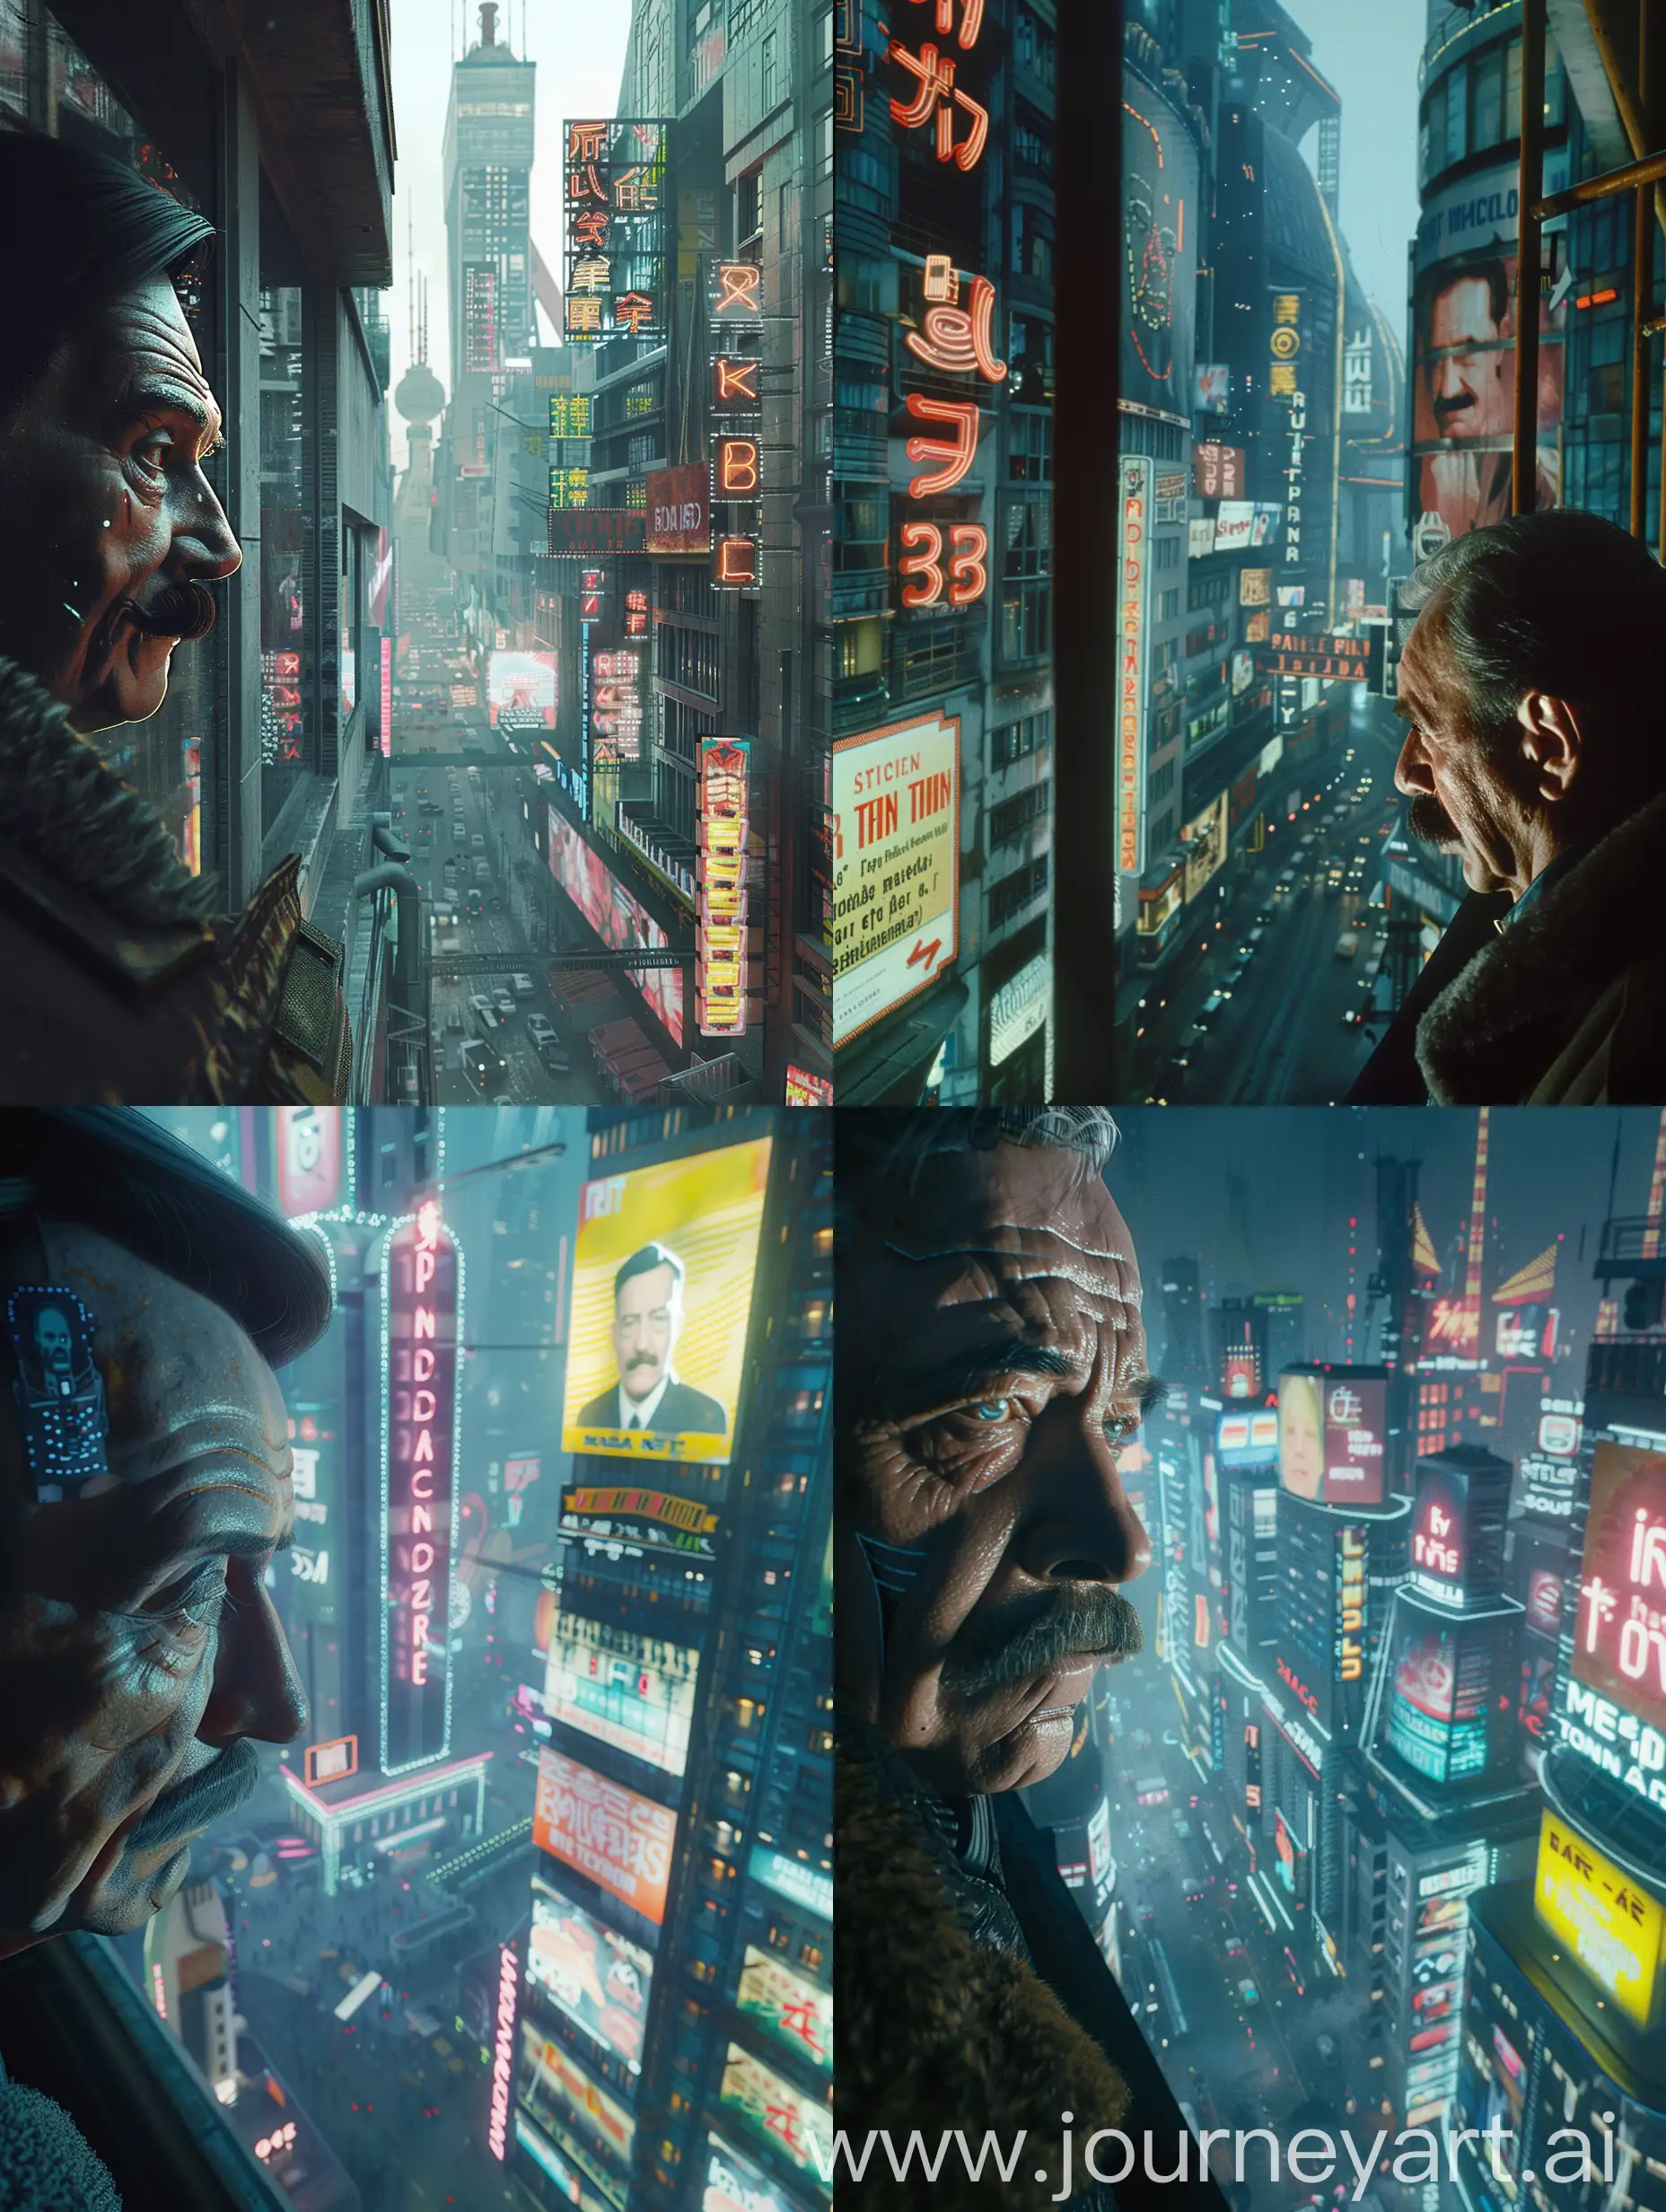 Dystopian-Cyberpunk-Future-City-with-Neon-Signs-and-Famous-Leader